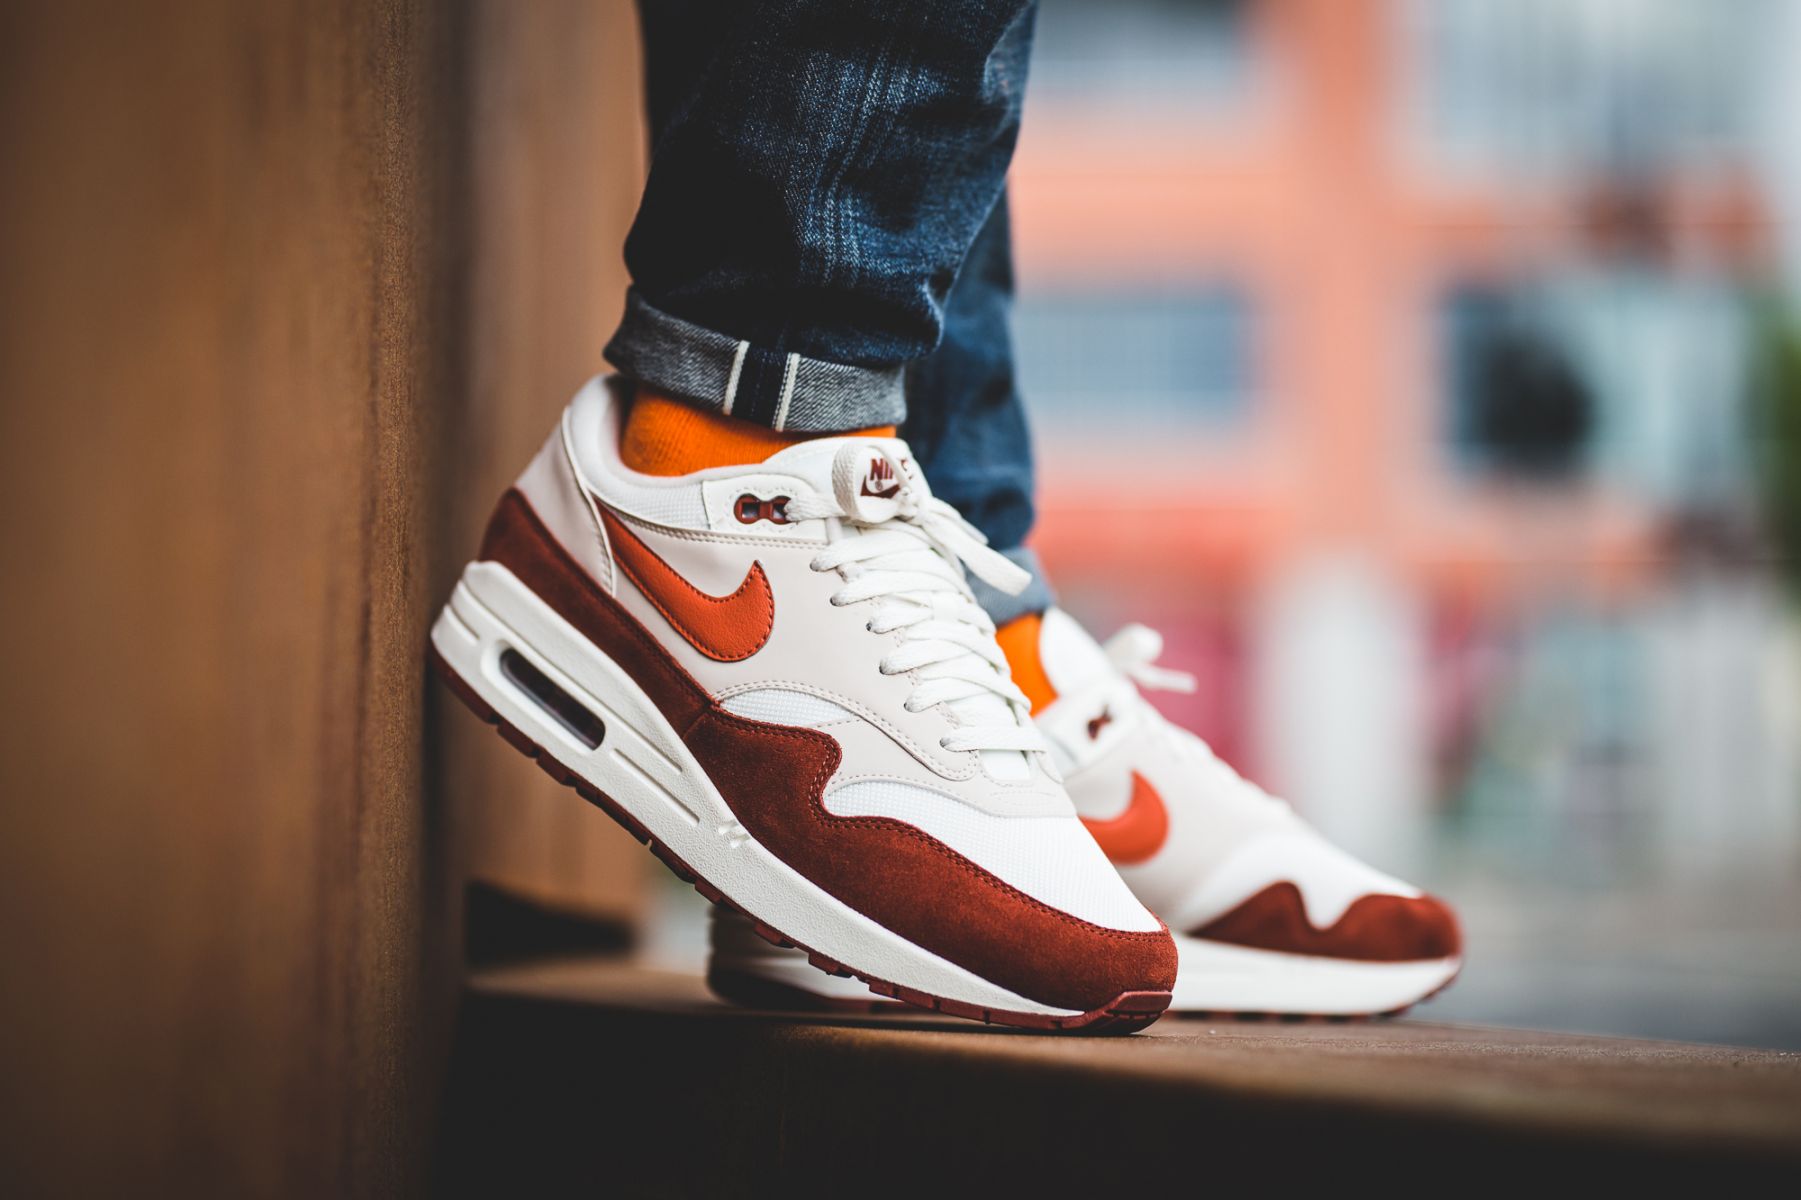 The Sole Restocks on Twitter: "Nike Air Max 1 Curry 2.0. Now on sale!! Link  &gt; https://t.co/RDEUyv4cAw https://t.co/0KLrPGUzeg" / Twitter